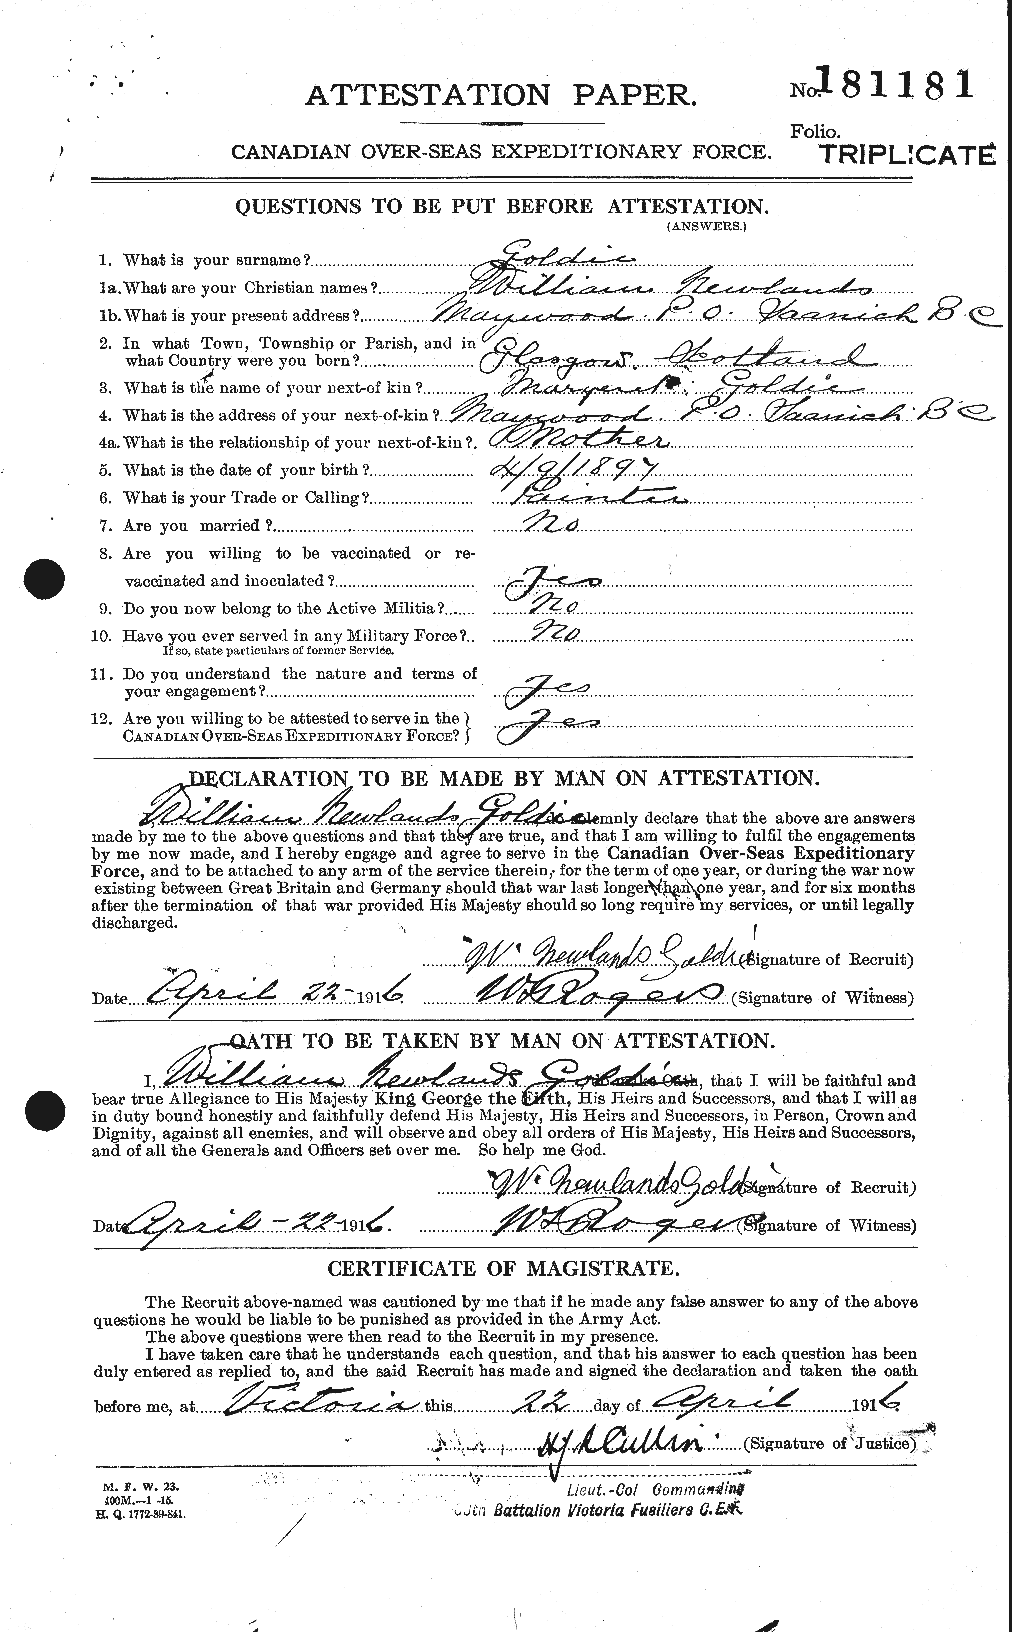 Personnel Records of the First World War - CEF 353958a